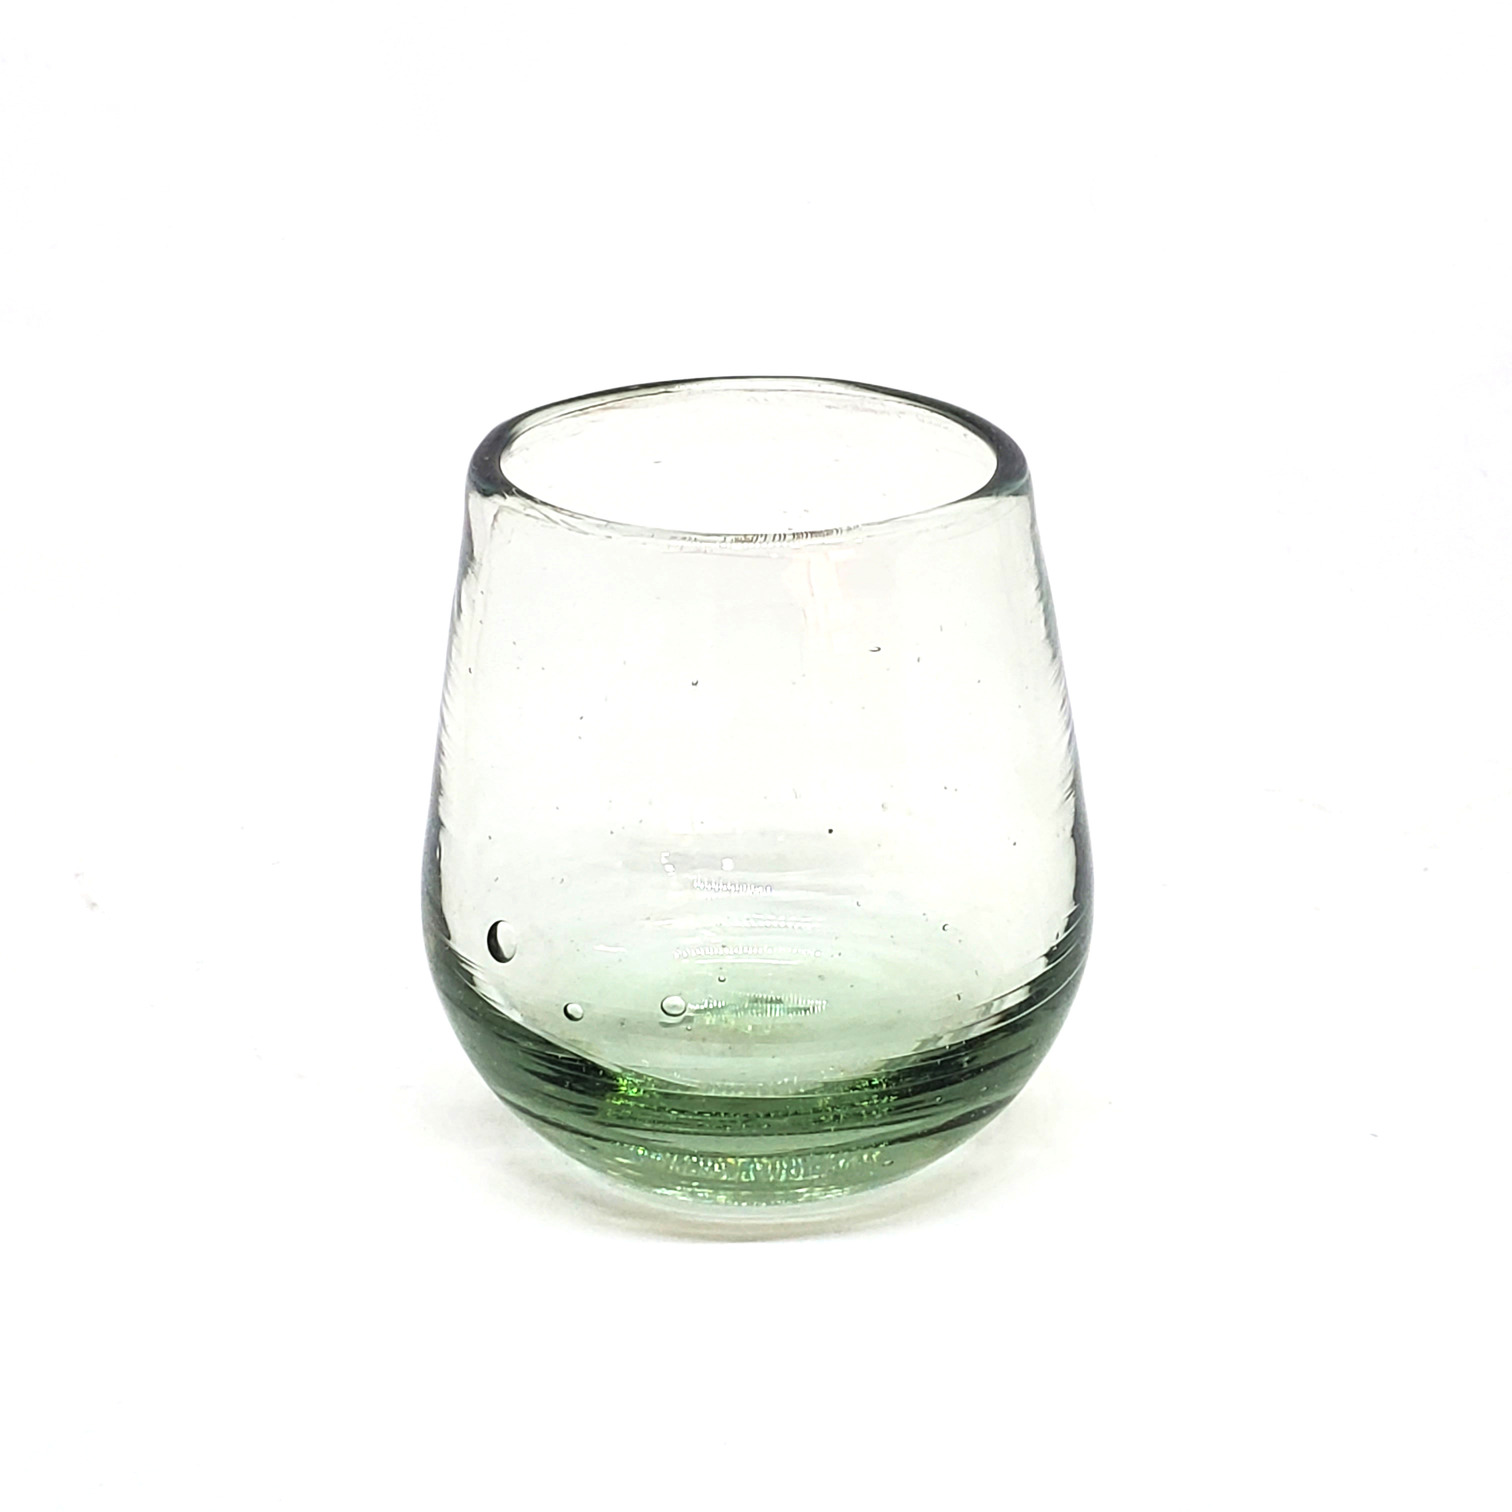 Wholesale MEXICAN GLASSWARE / Clear Roly Poly Glasses  / Our Clear Blown Glasses are individually handcrafted from recycled glass, making each of them unique works of art.